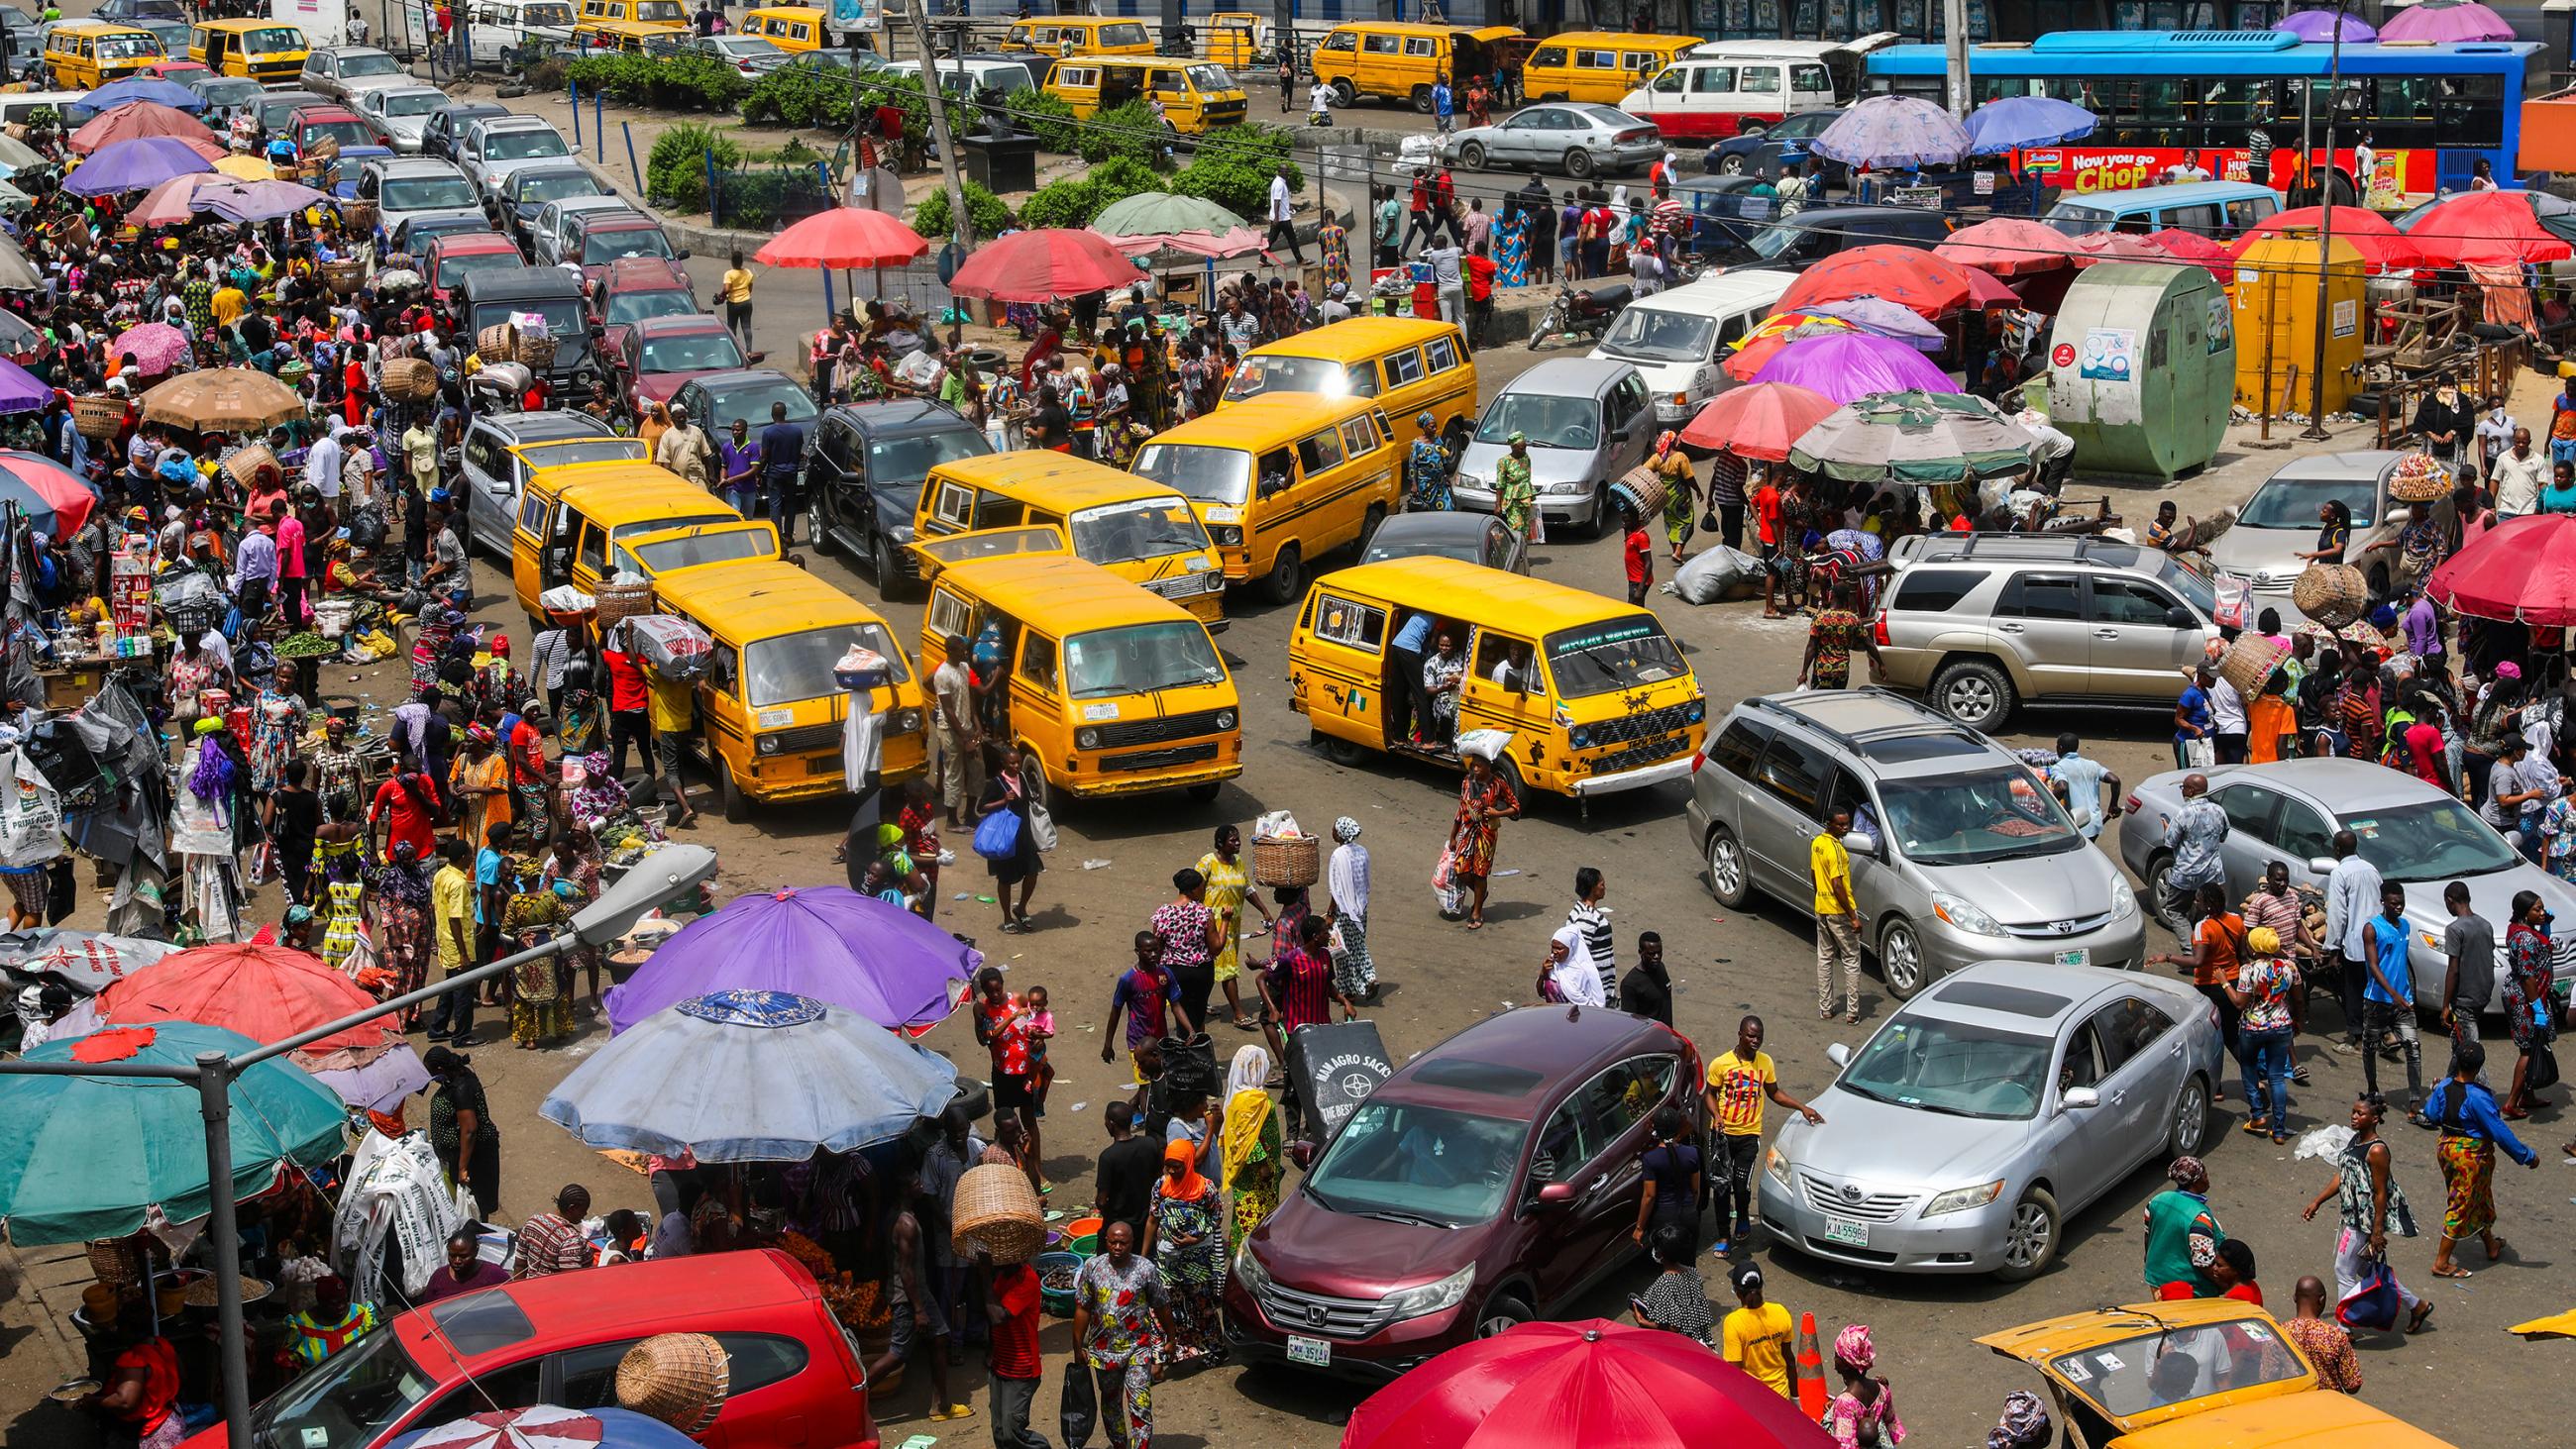 The photo shows a bustling market crowded with people and cars. 